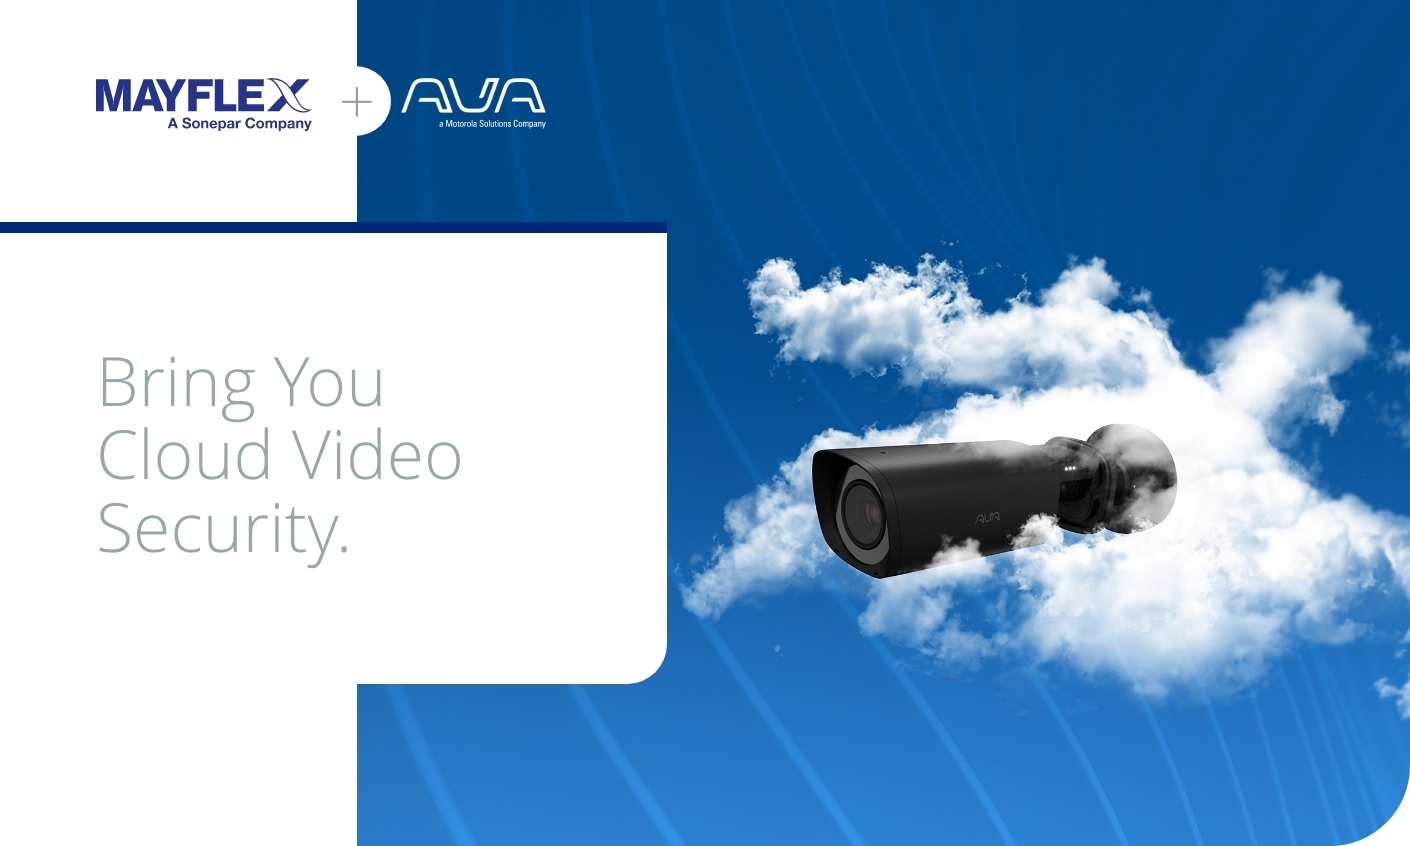  Mayflex to Distribute AVA Security the Innovative Cloud Solution from Motorola Solutions